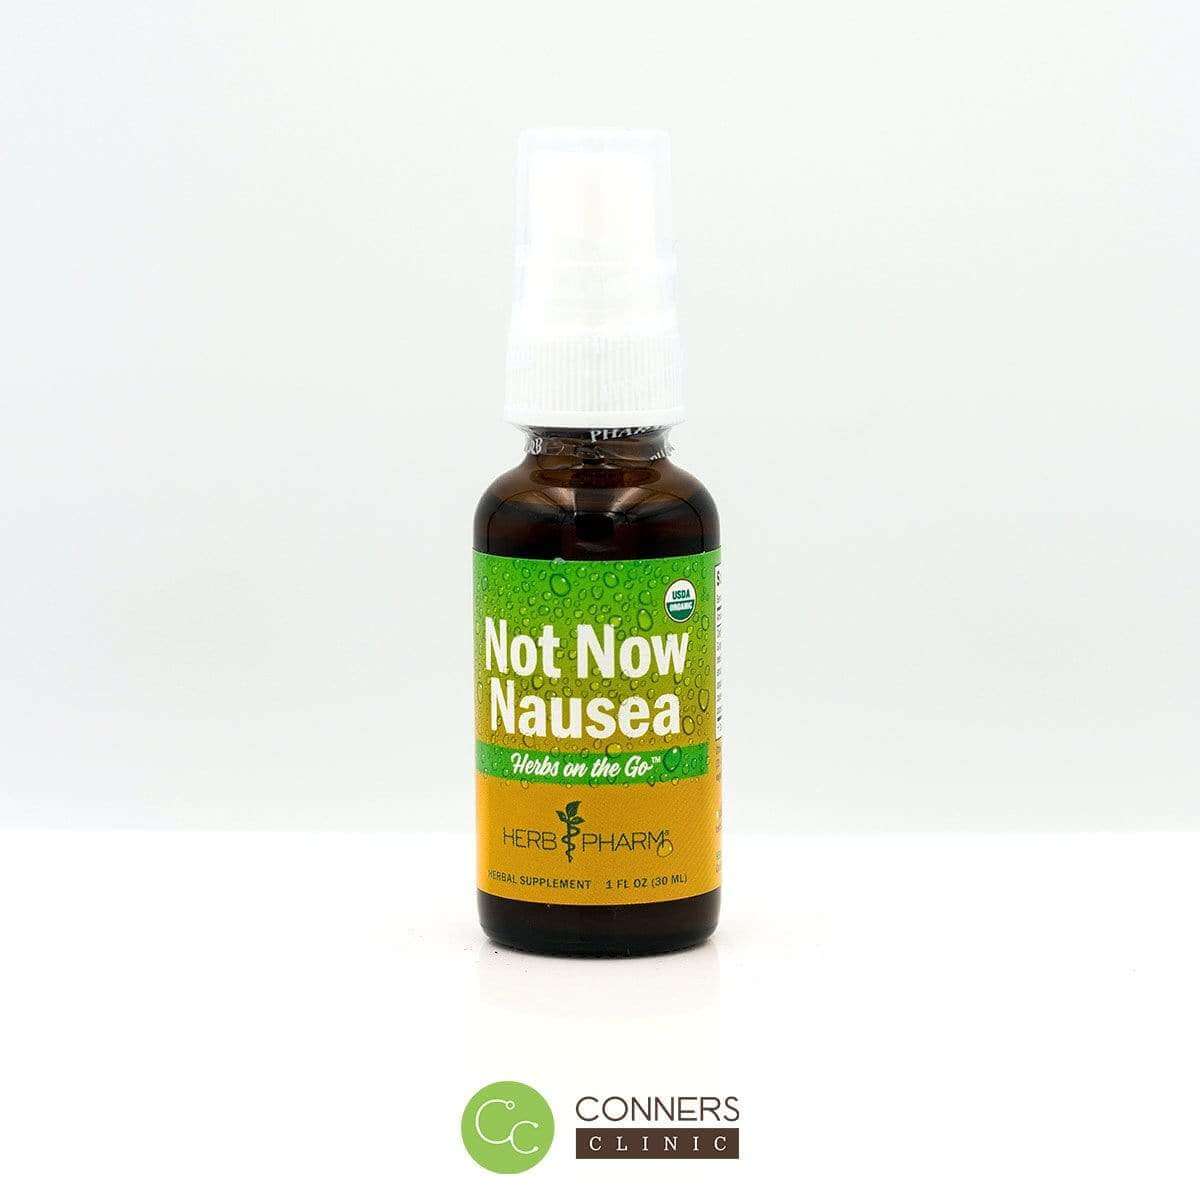 Not Now Nausea Spray - Herb Pharm Herb Pharm Supplement - Conners Clinic